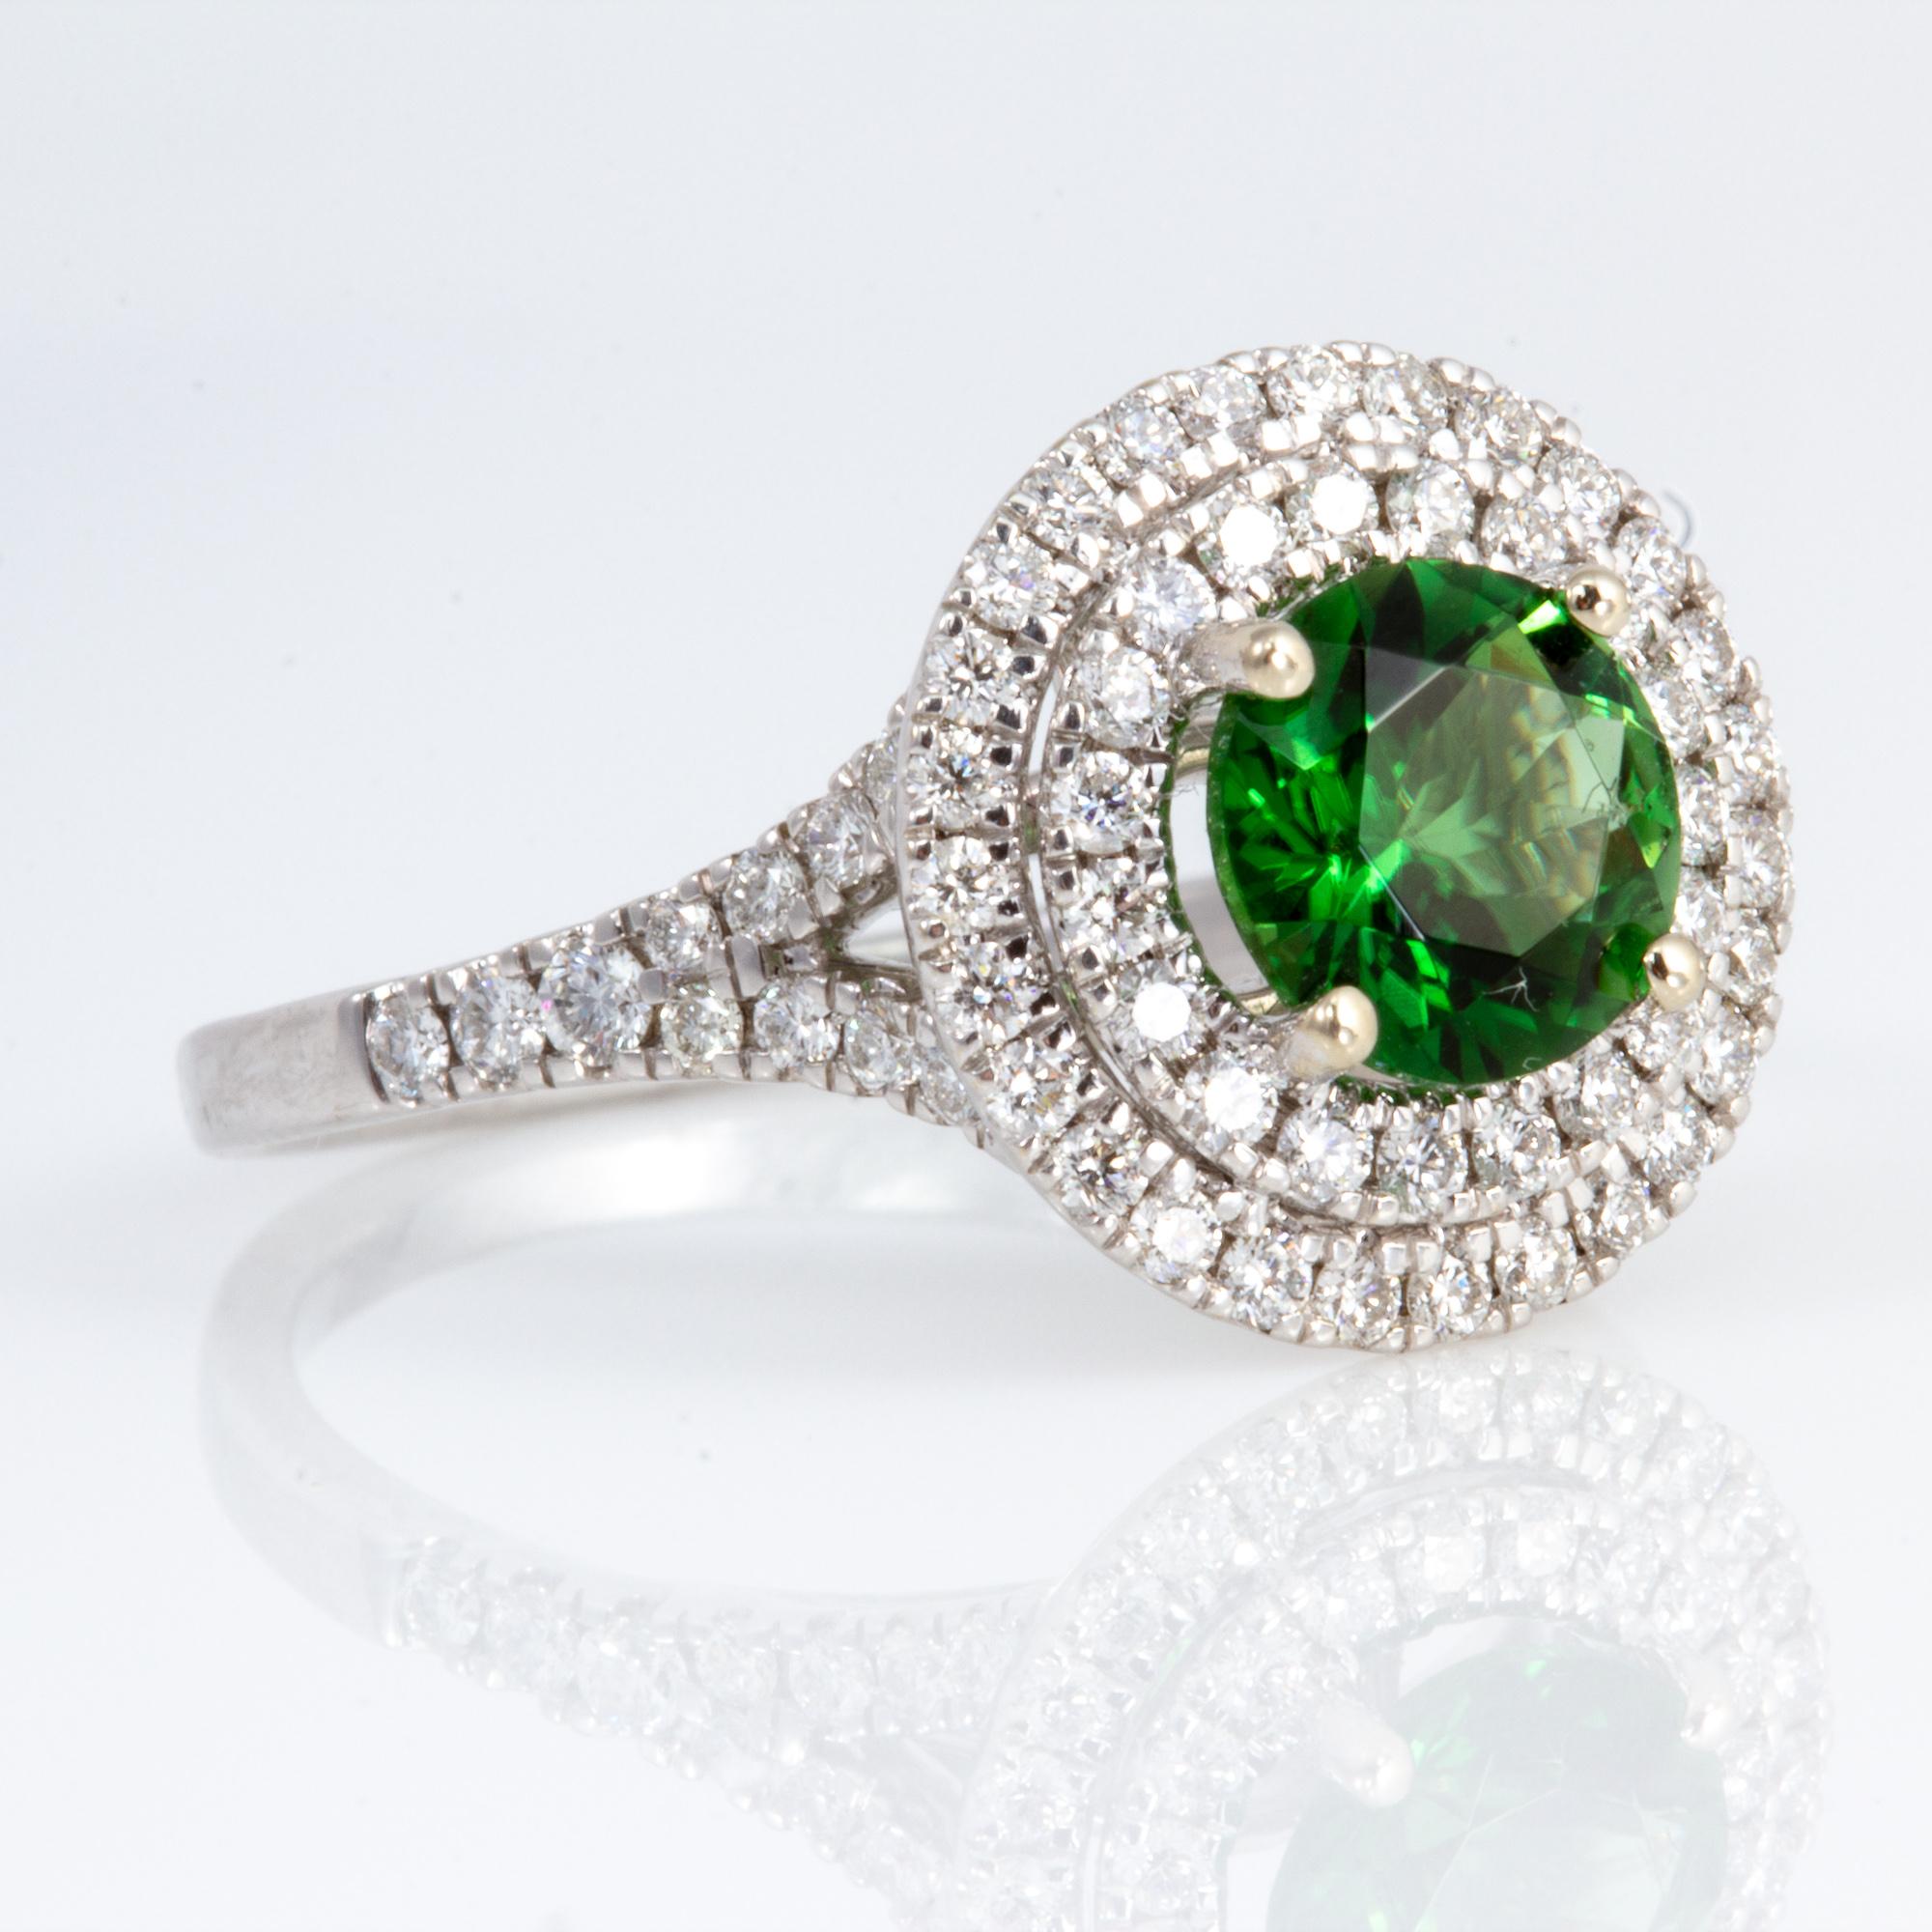 Exceptionally Well Cut 1.26 Carat Chrome Tourmaline and Diamond Ring For Sale 9